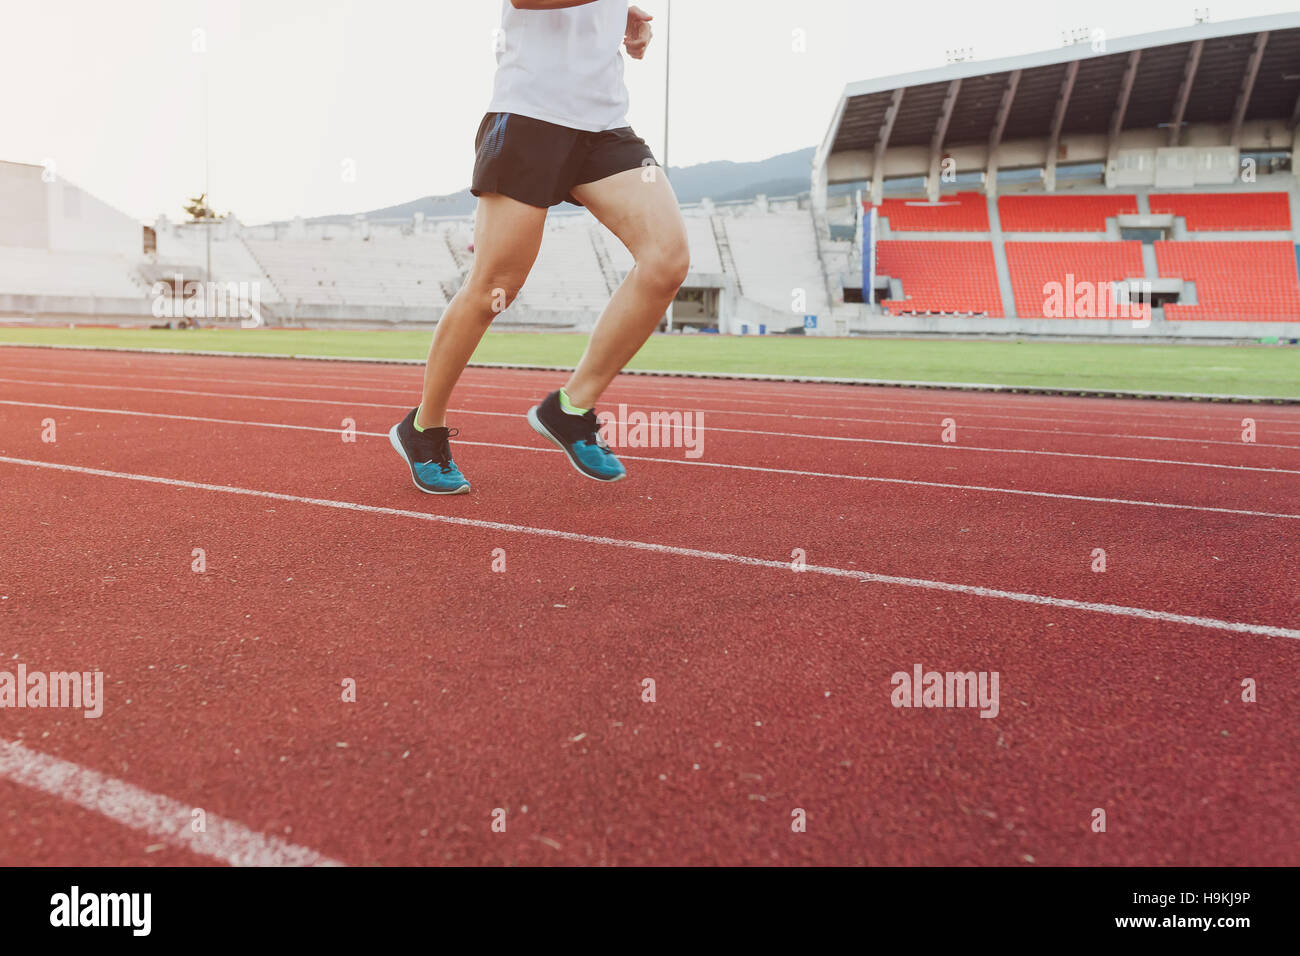 Runners sprinting outdoors Sportive people training in a urban area, healthy lifestyle and sport concepts. Stock Photo